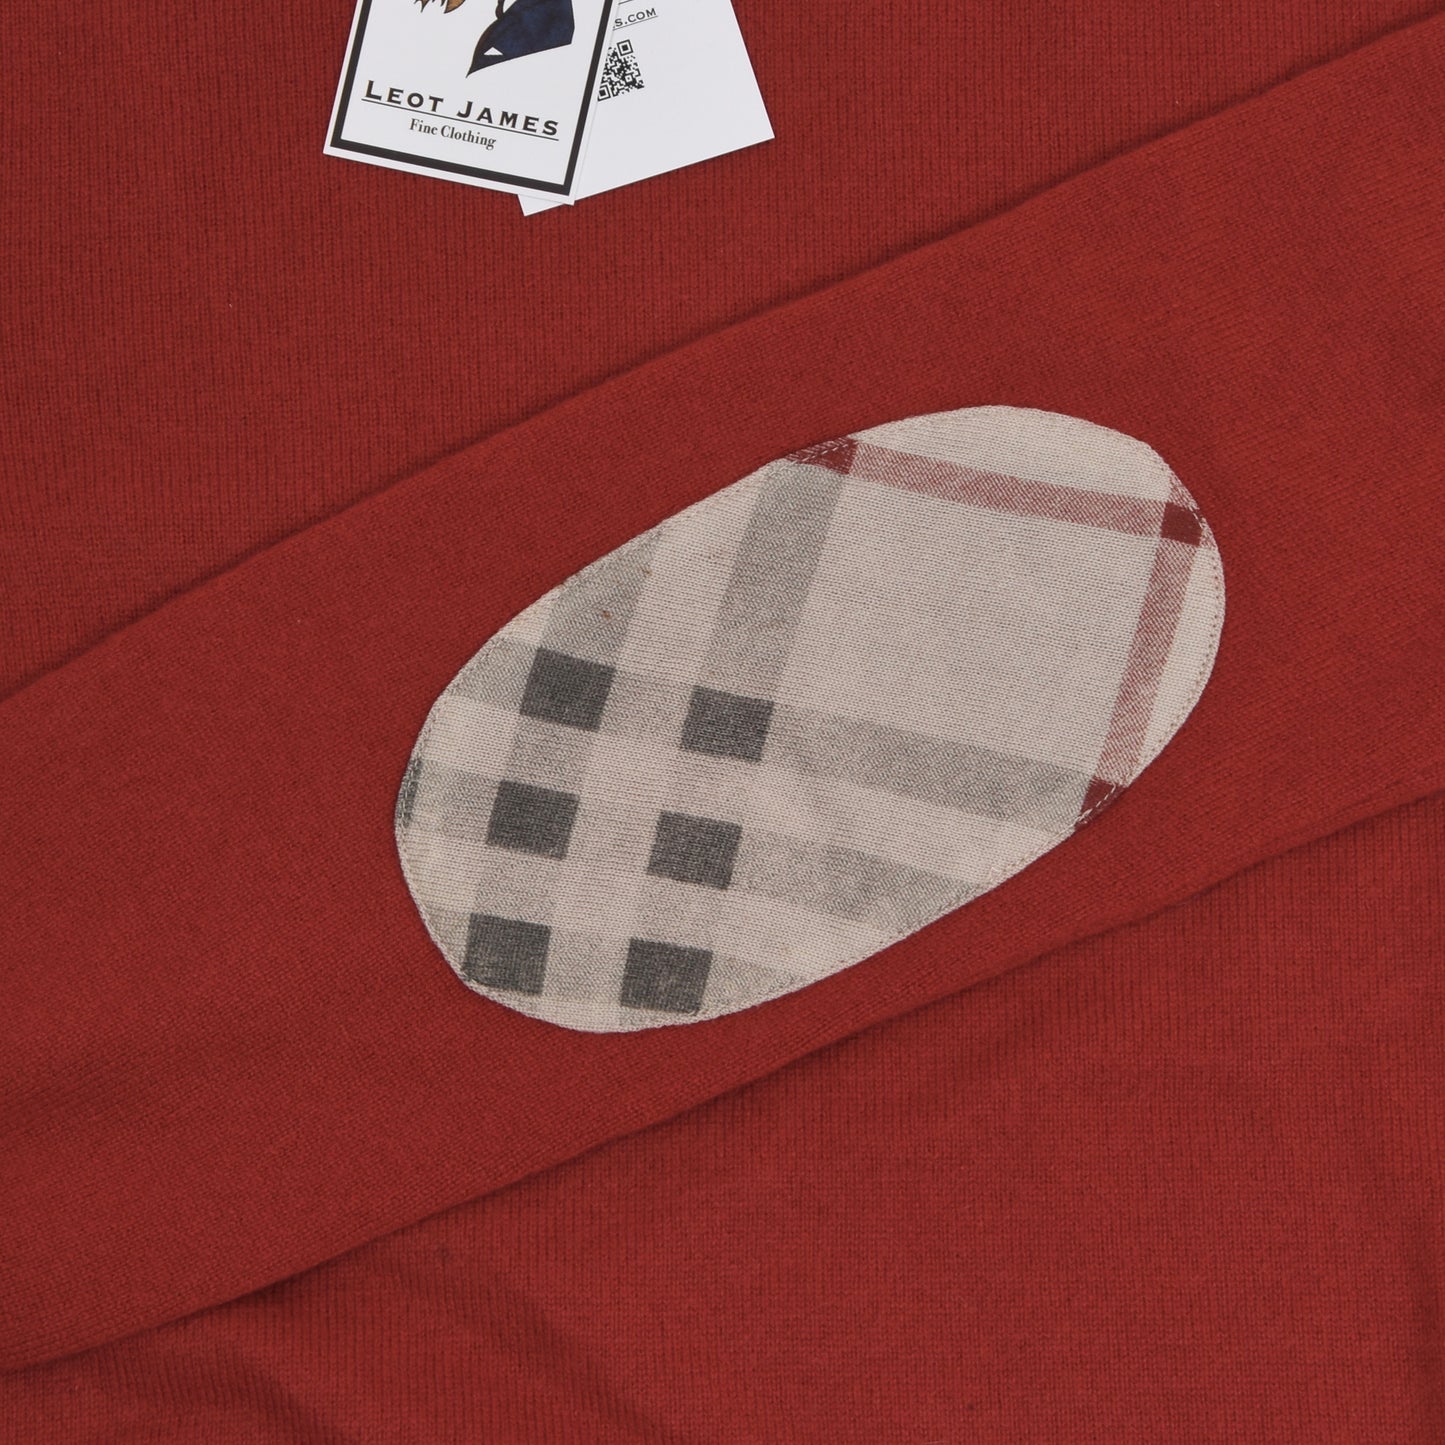 Burberry Brit 100% Cashmere Sweater Size S - Red